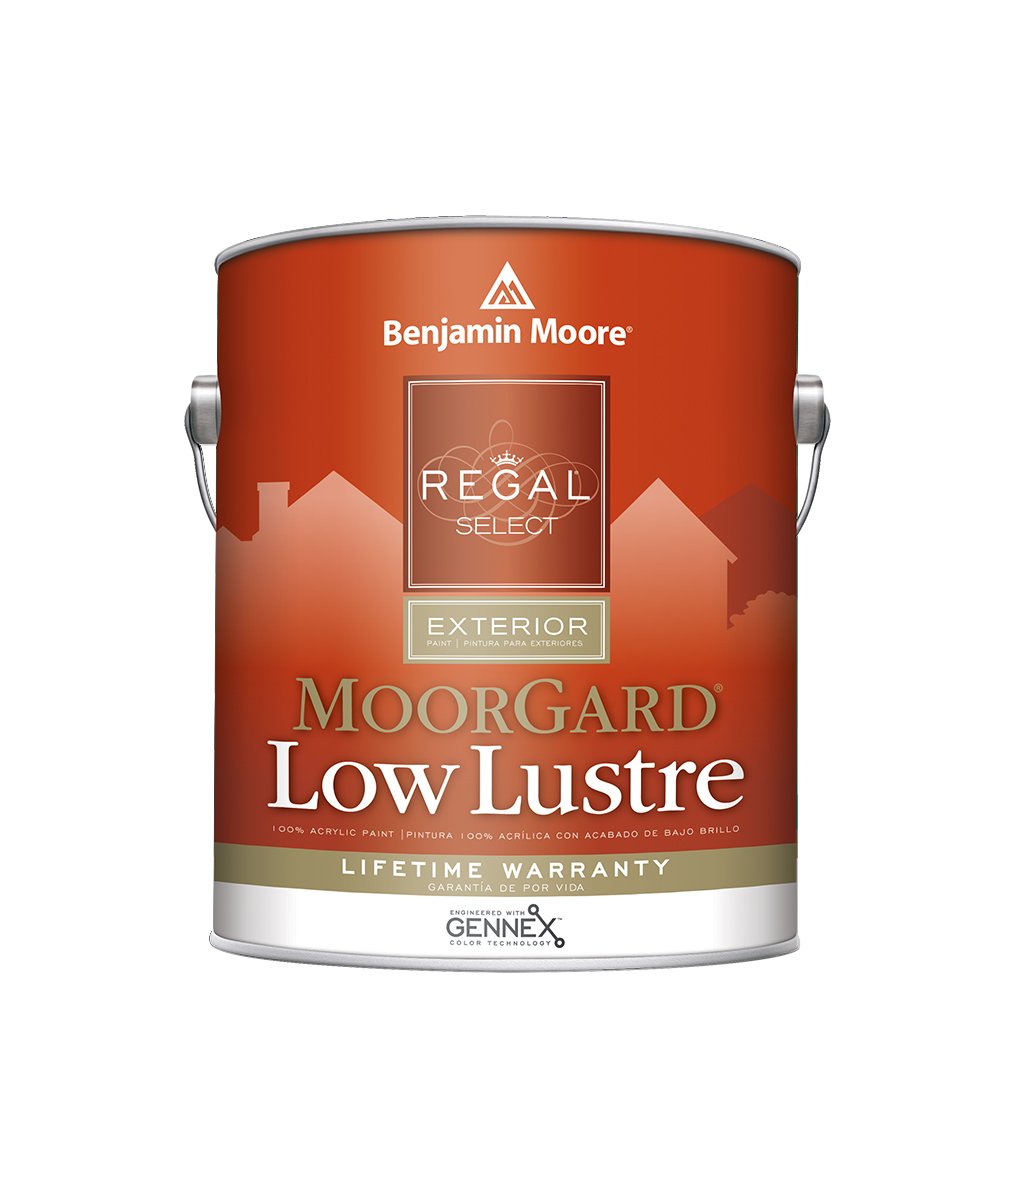 Benjamin Moore Regal Select Low Lustre Exterior Paint available at Clement's Paint